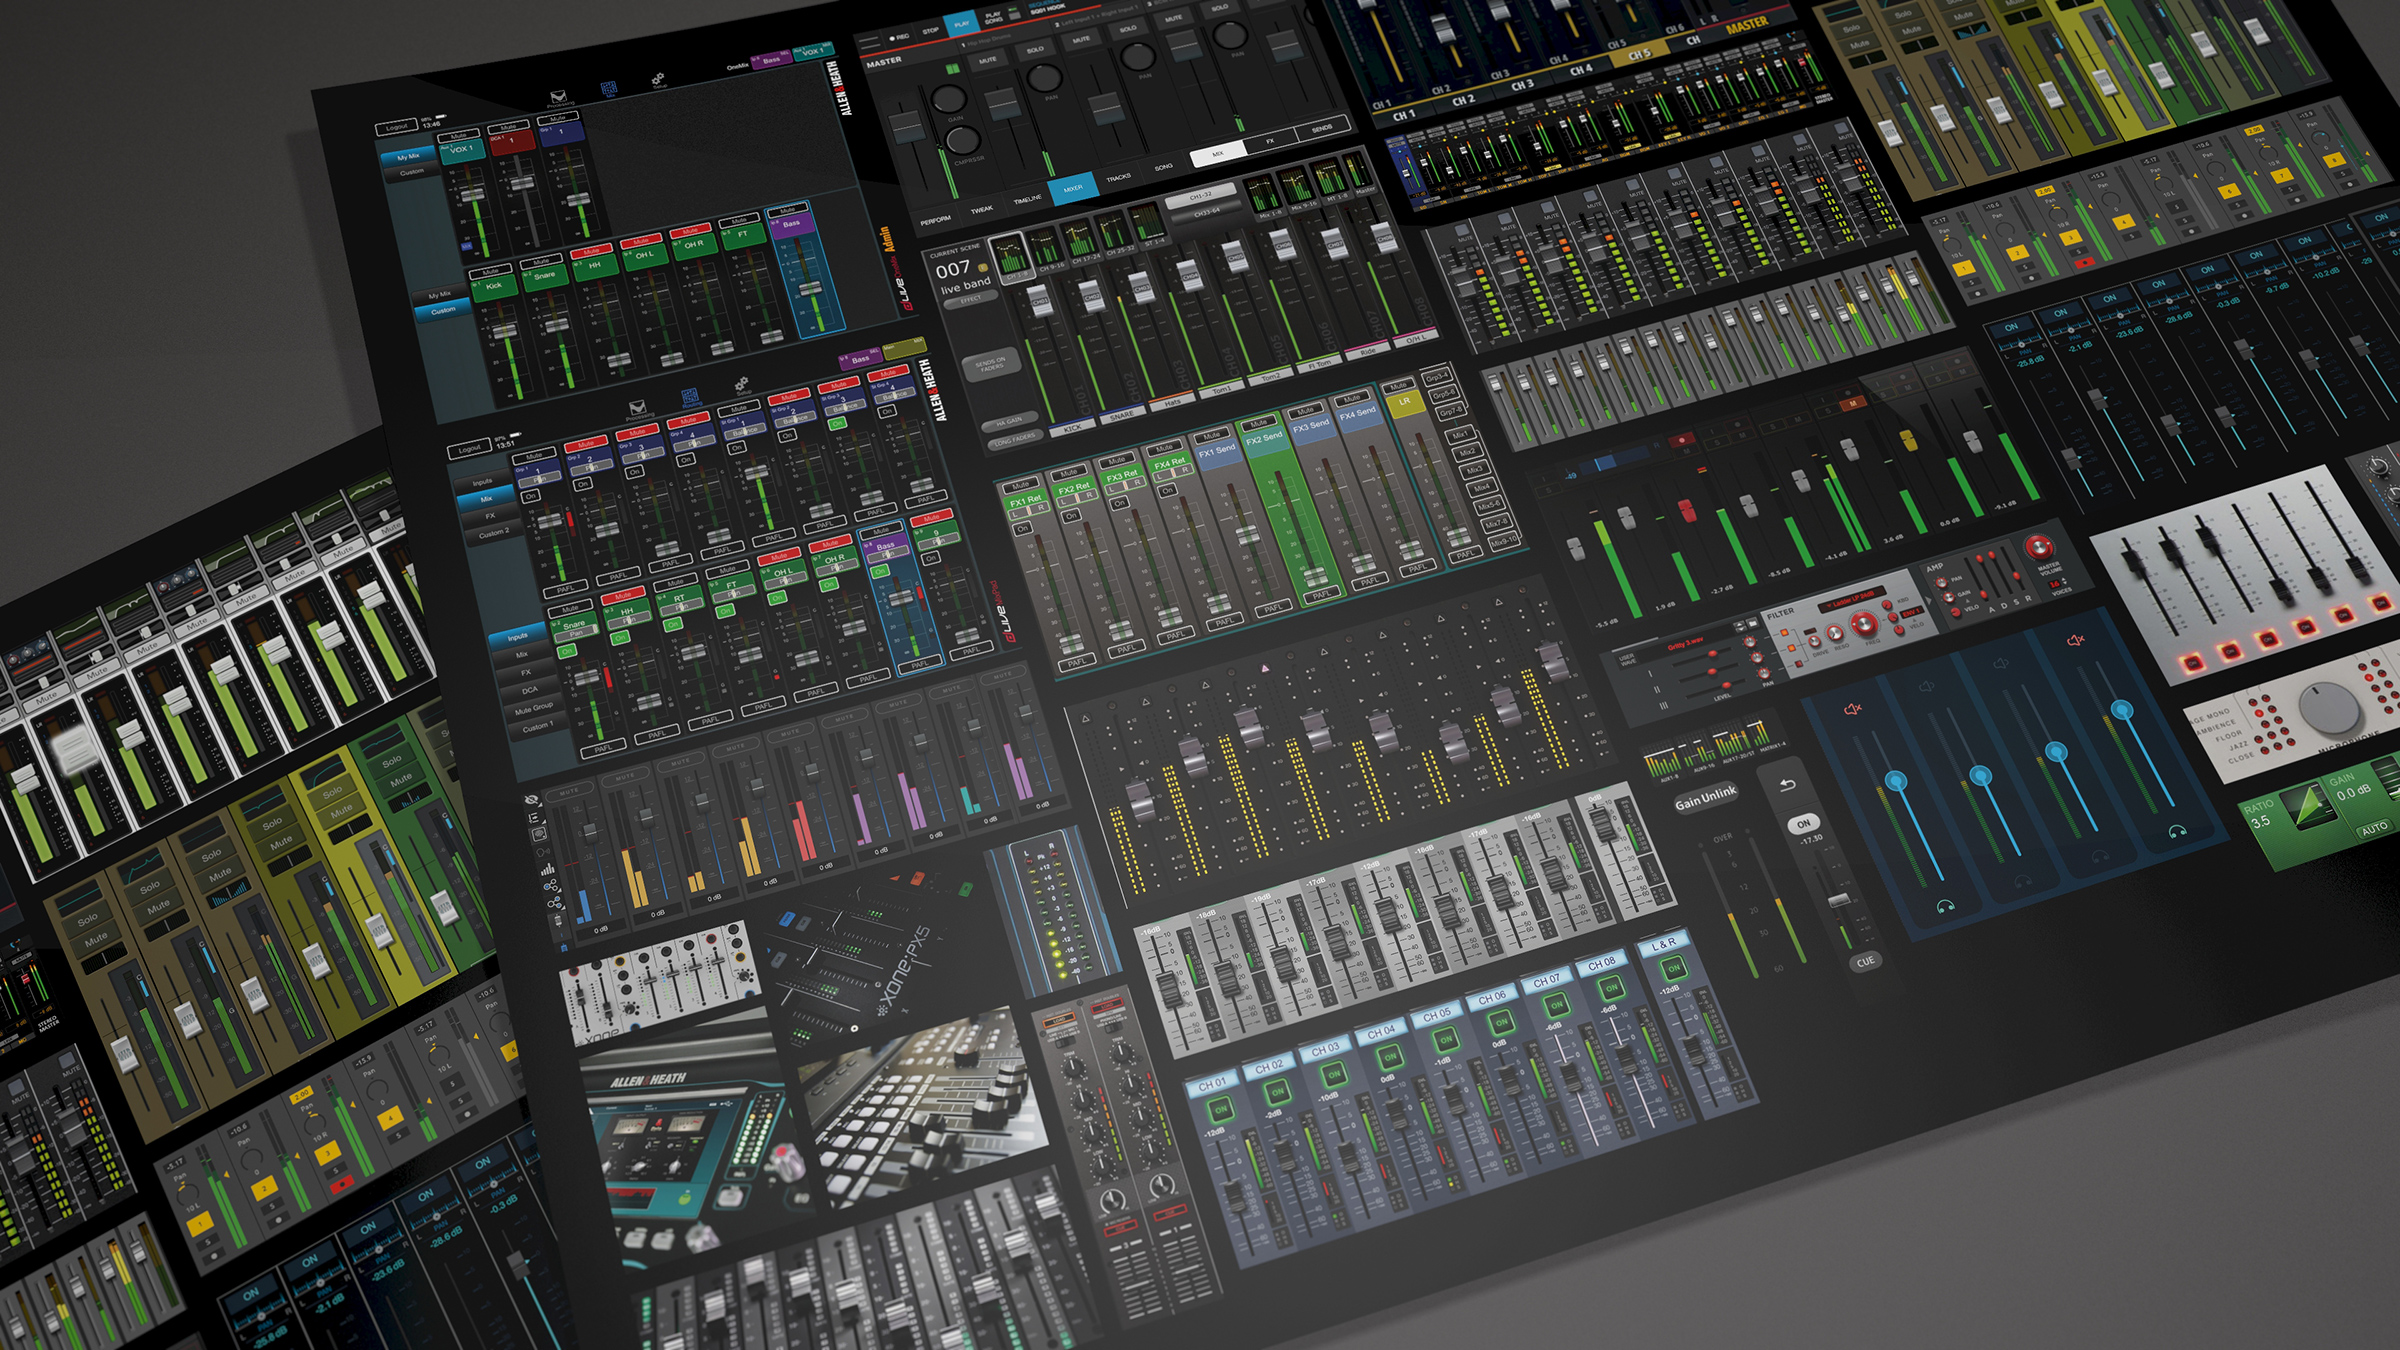 We delved deep into the controller software space analysing a wealth of sliders, faders and buttons. 